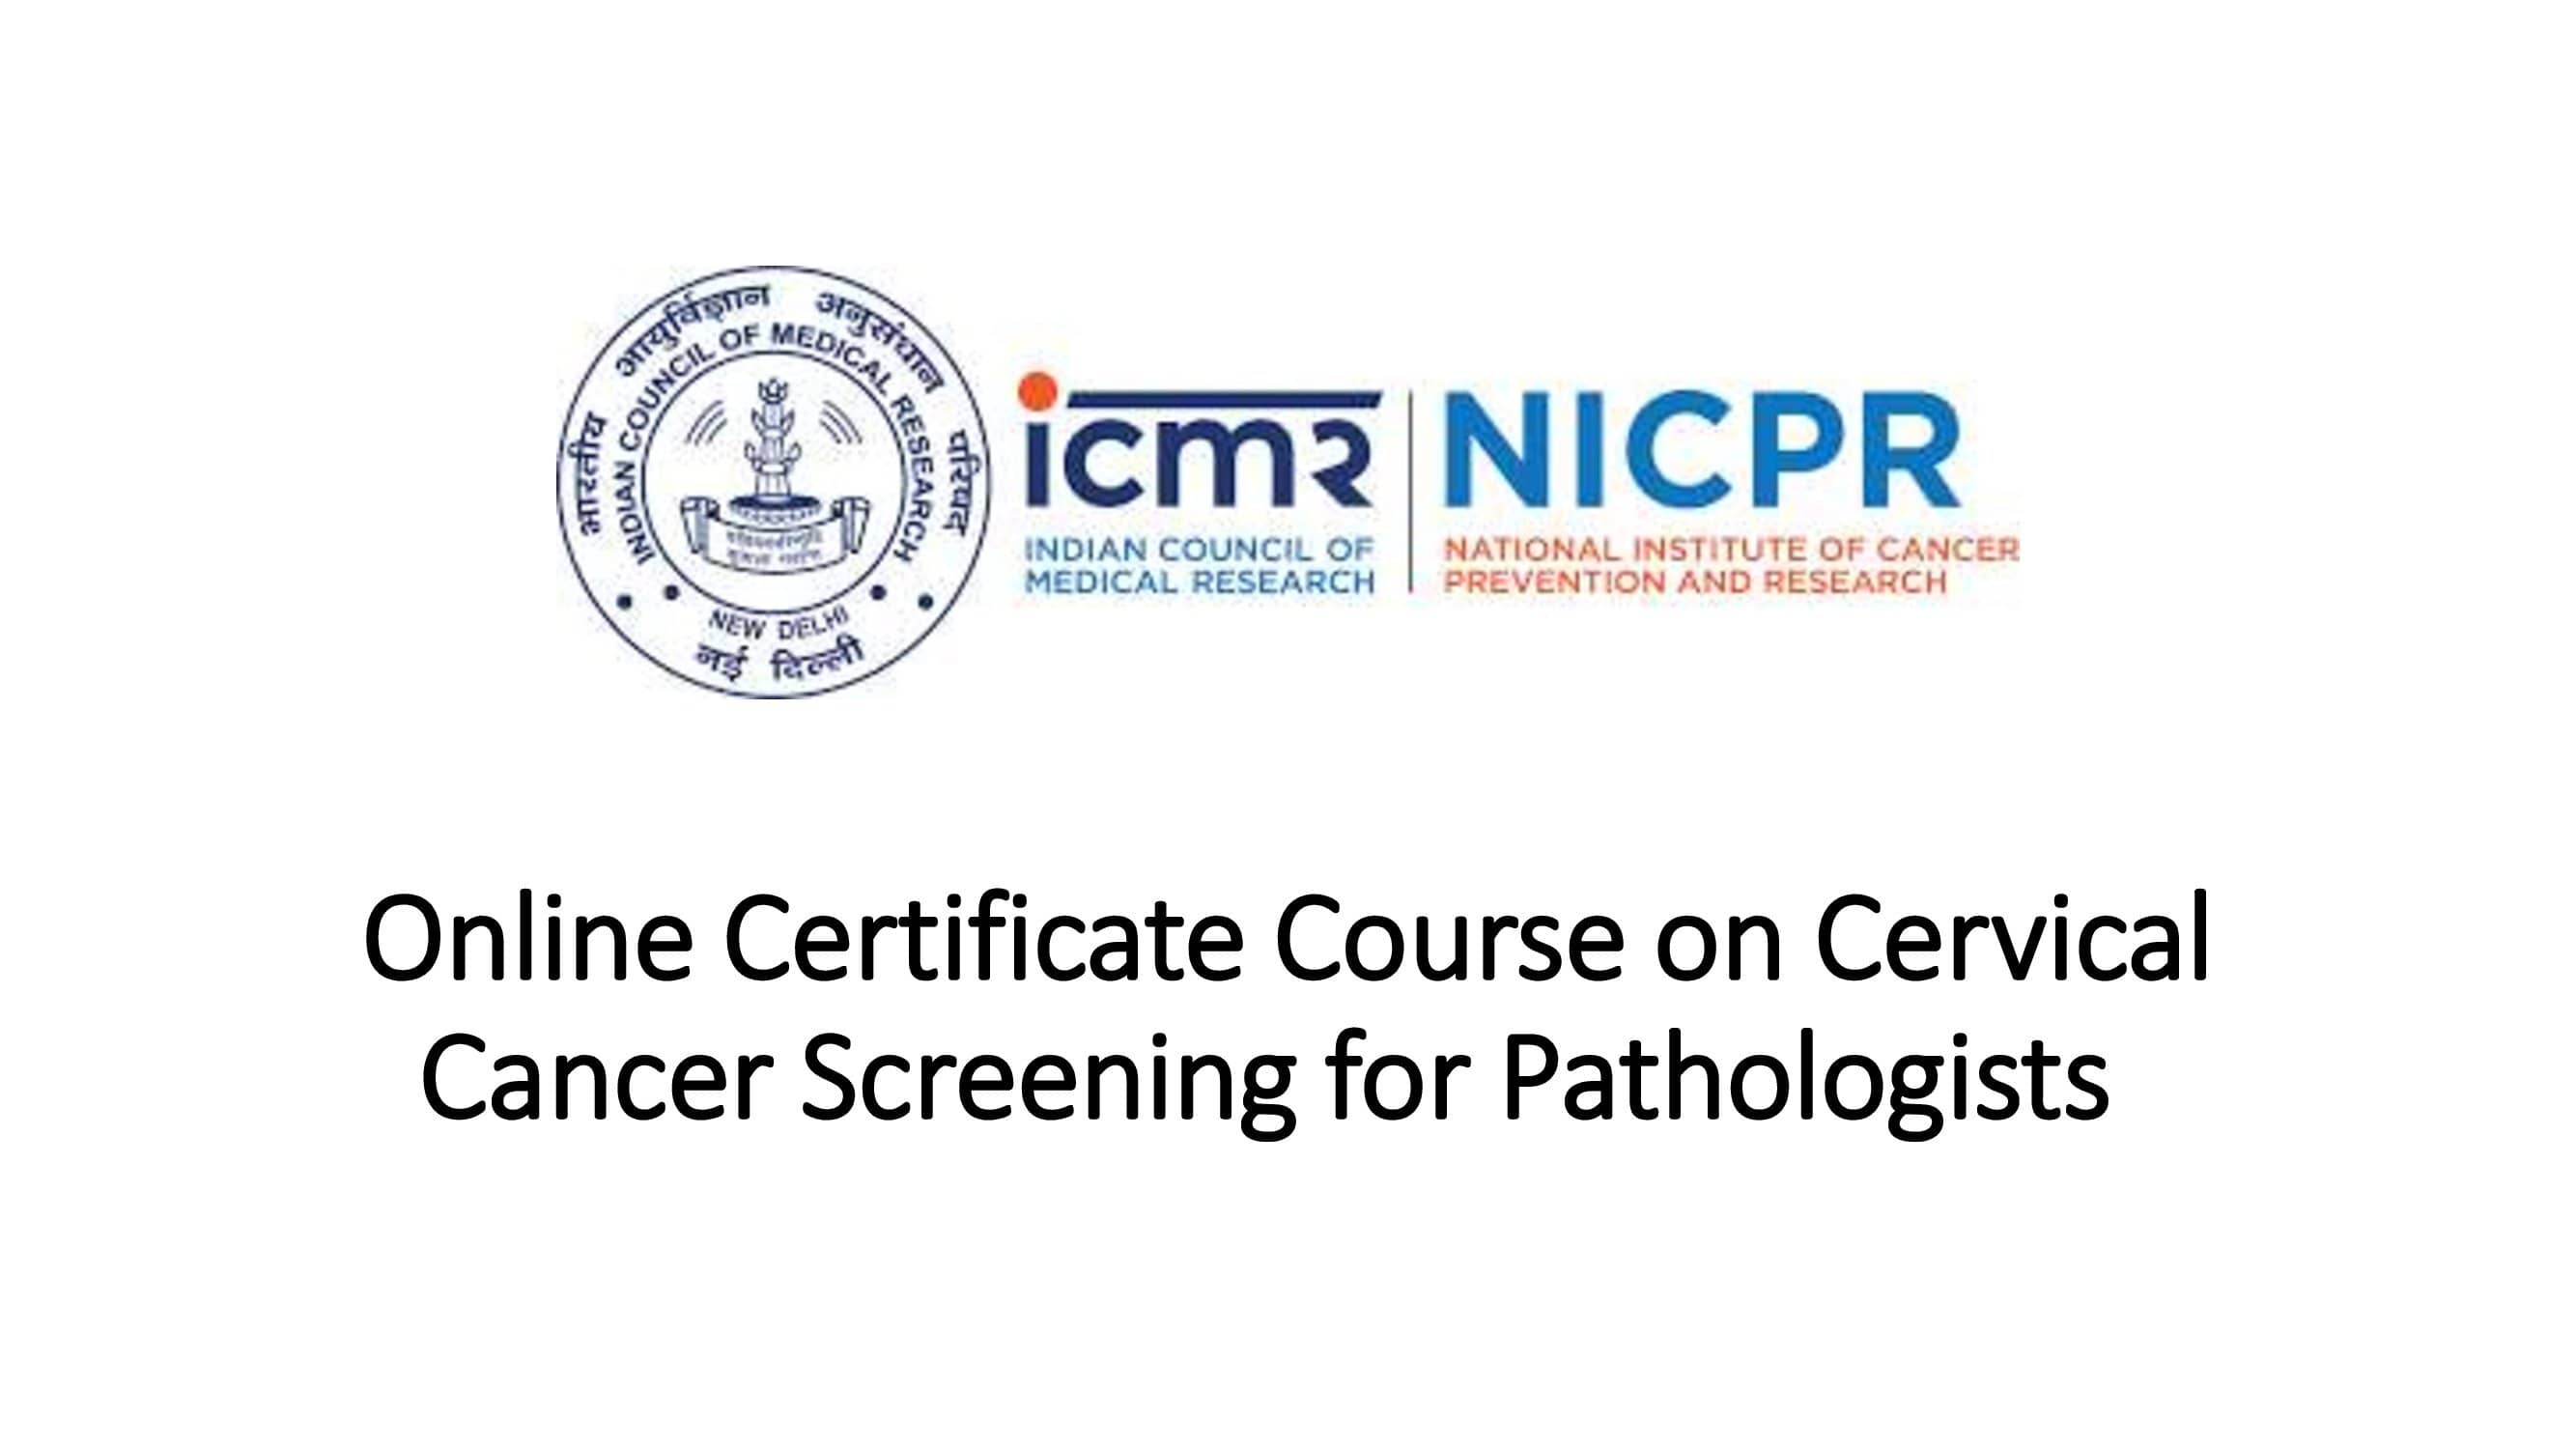 Online Certificate Course on Cervical Cancer Screening for Pathologists through ECHO platform